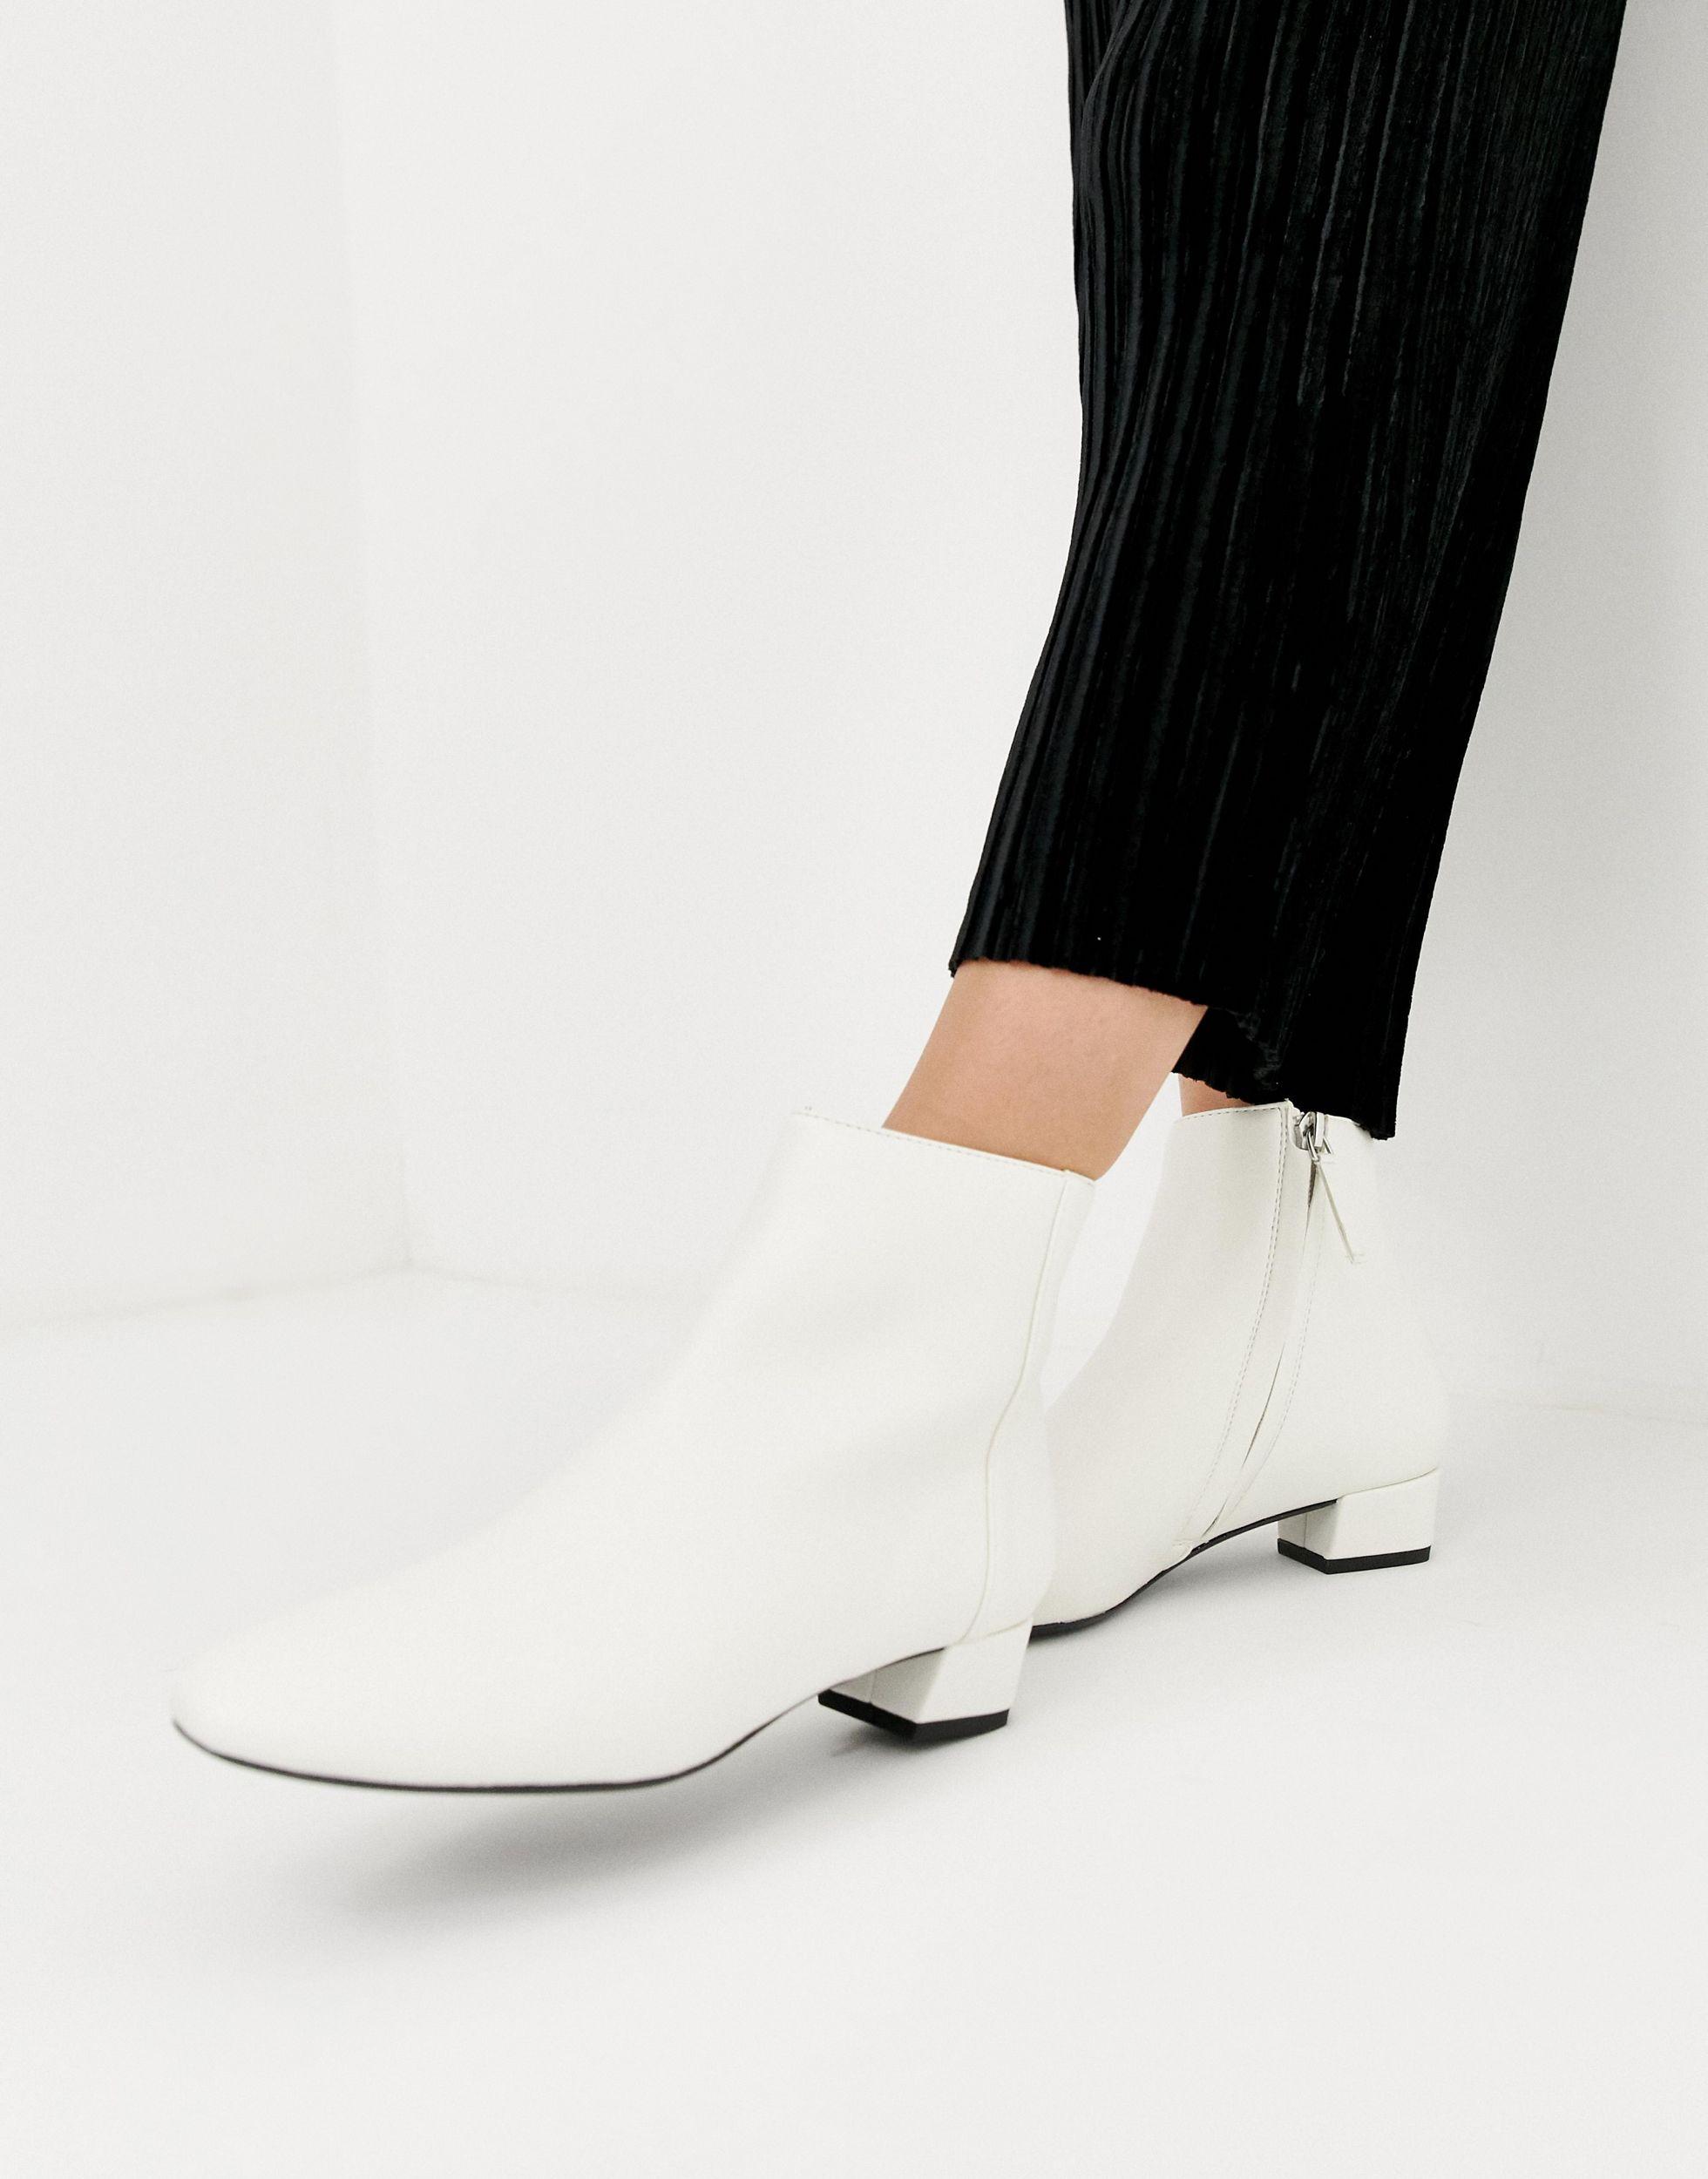 Mango Almond Toe Ankle Boots In White | Lyst